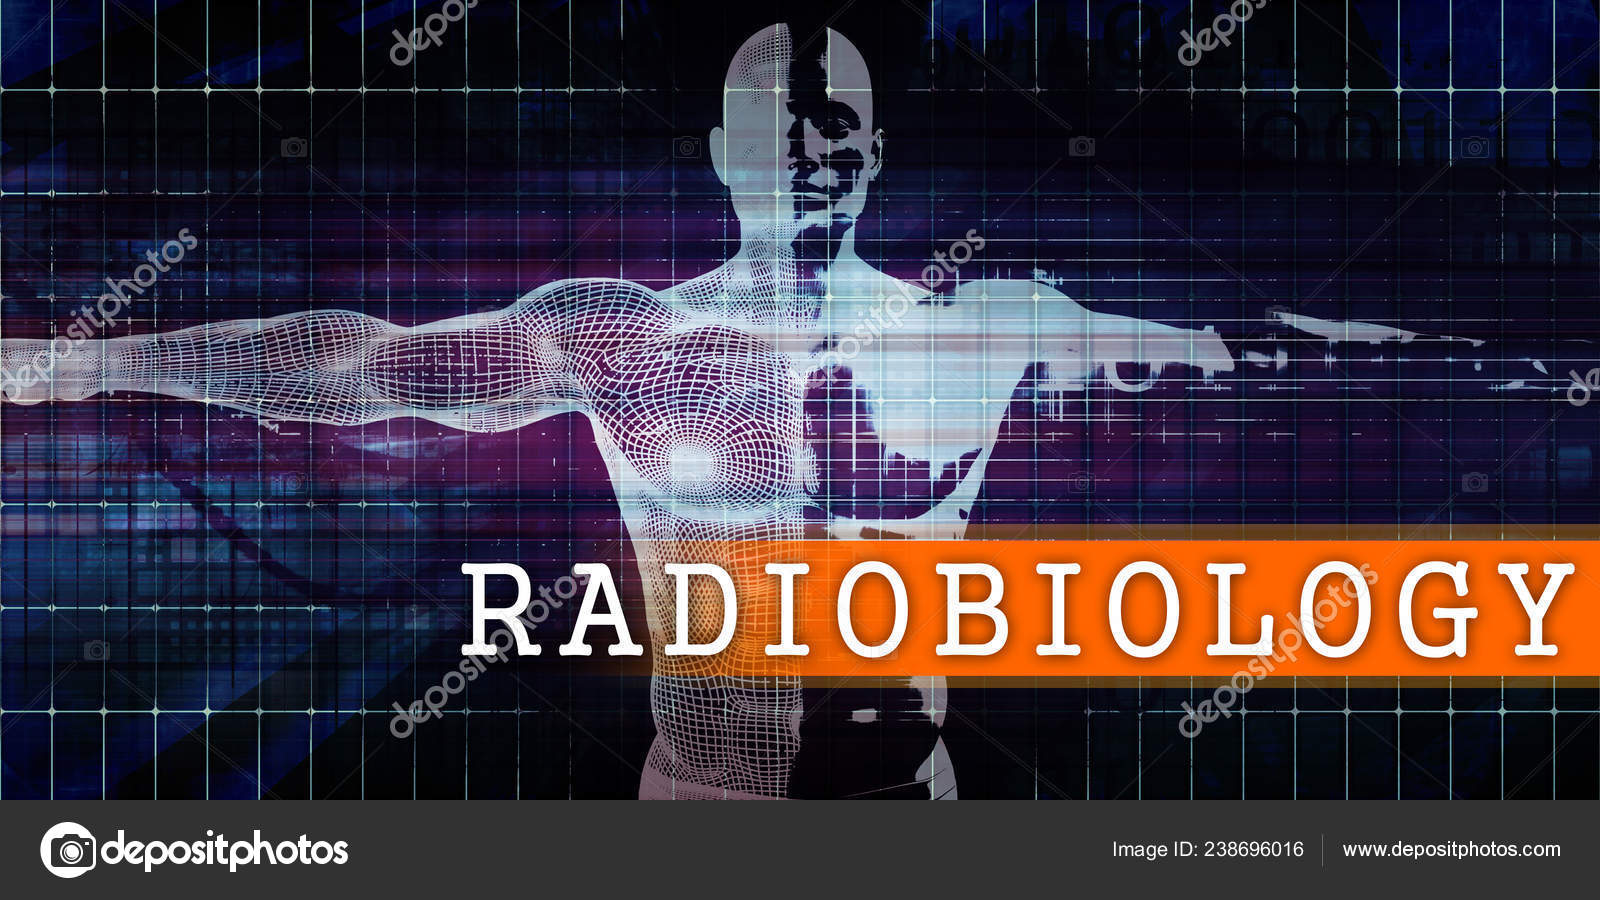 Body　Photo　©kentoh　Scan　Concept　Stock　by　Human　Radiobiology　Industry　Medical　238696016